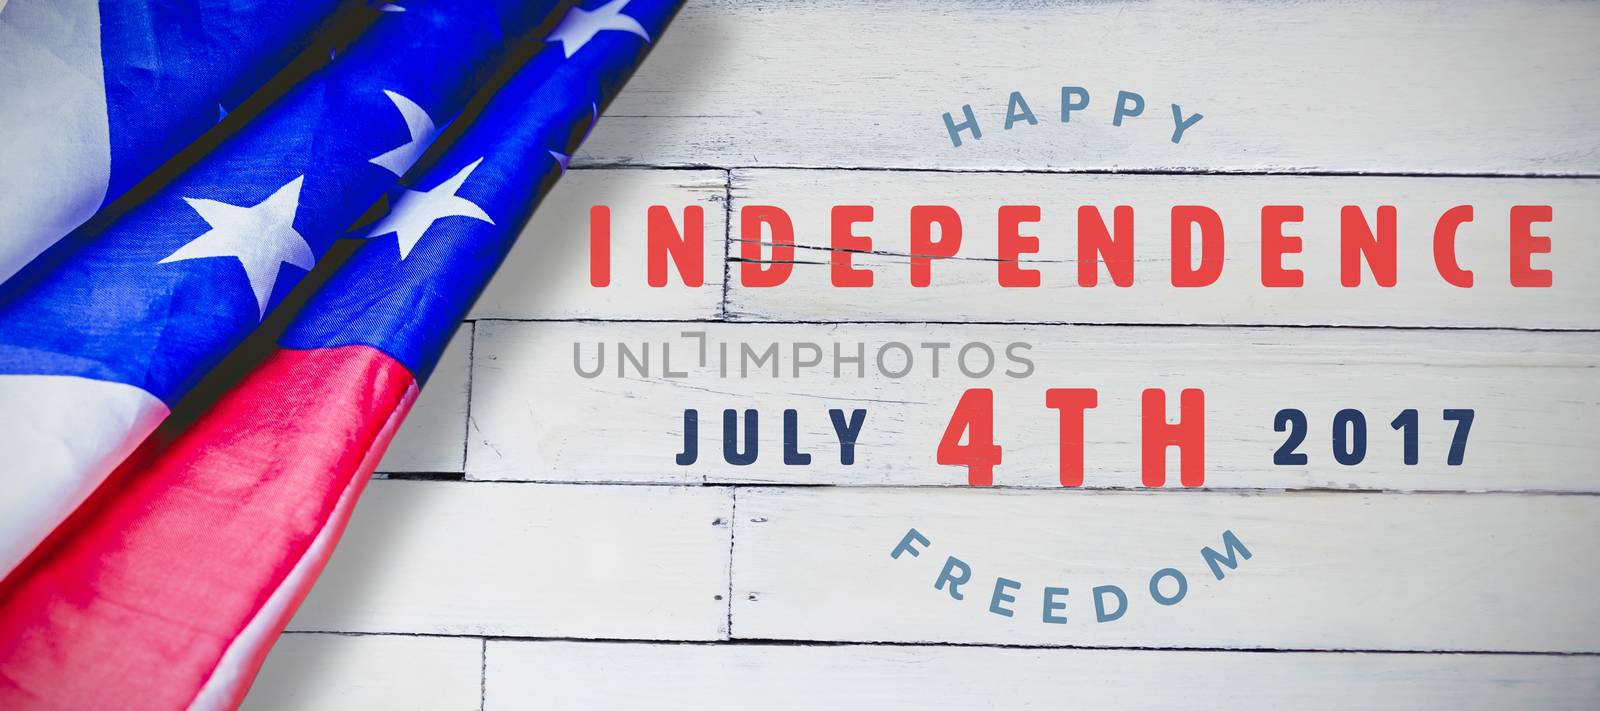 Computer graphic image of happy 4th of july text against wood panelling